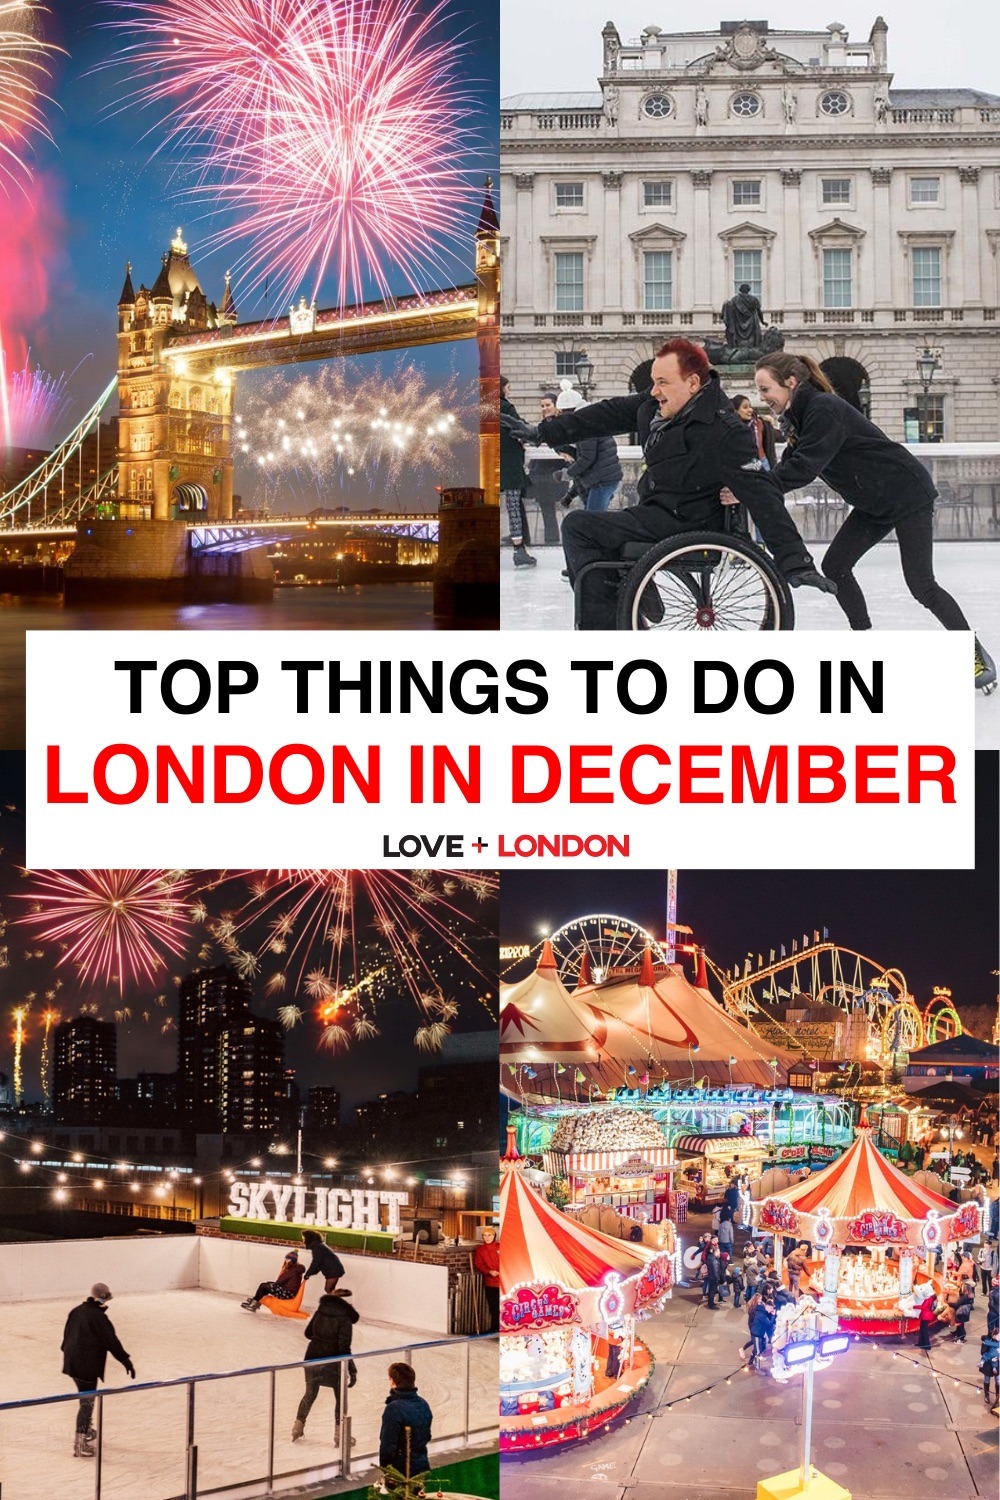 8 Top Things to Do in London in December | Love and London